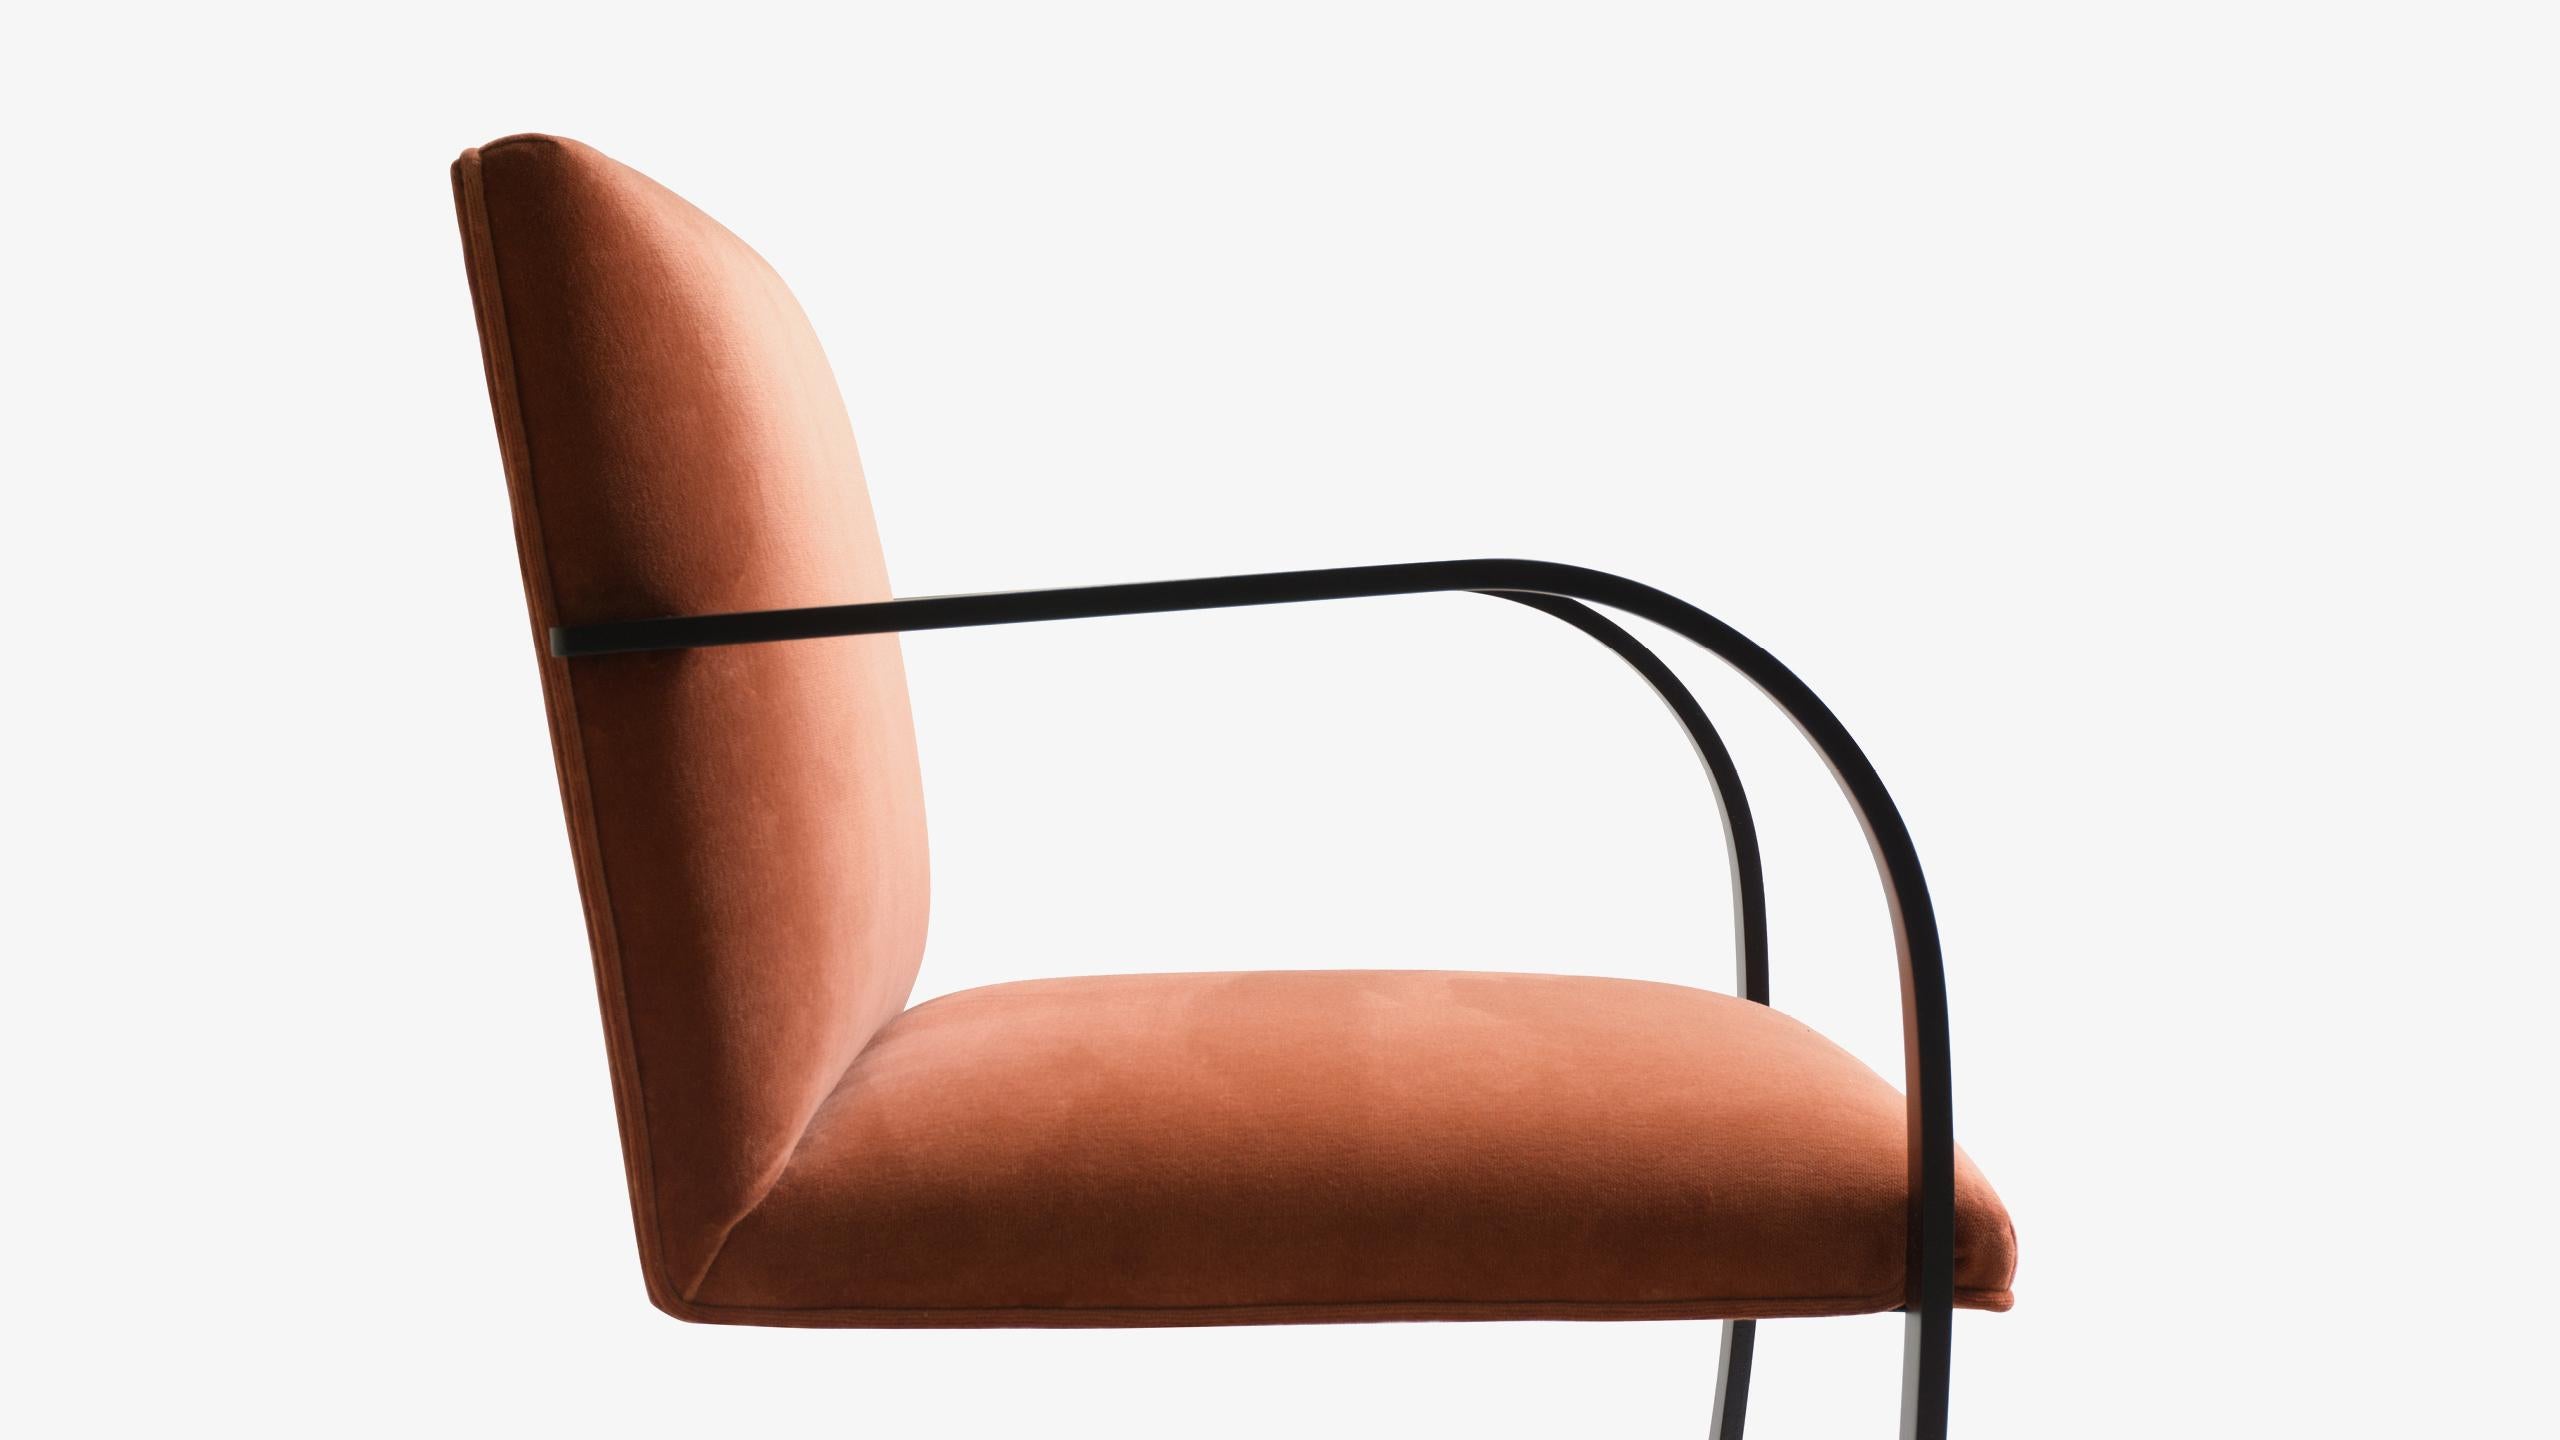 Powder-Coated Brno Flat-Bar Chairs Velvet, Obsidian Matte by Mies van der Rohe for Knoll, 6